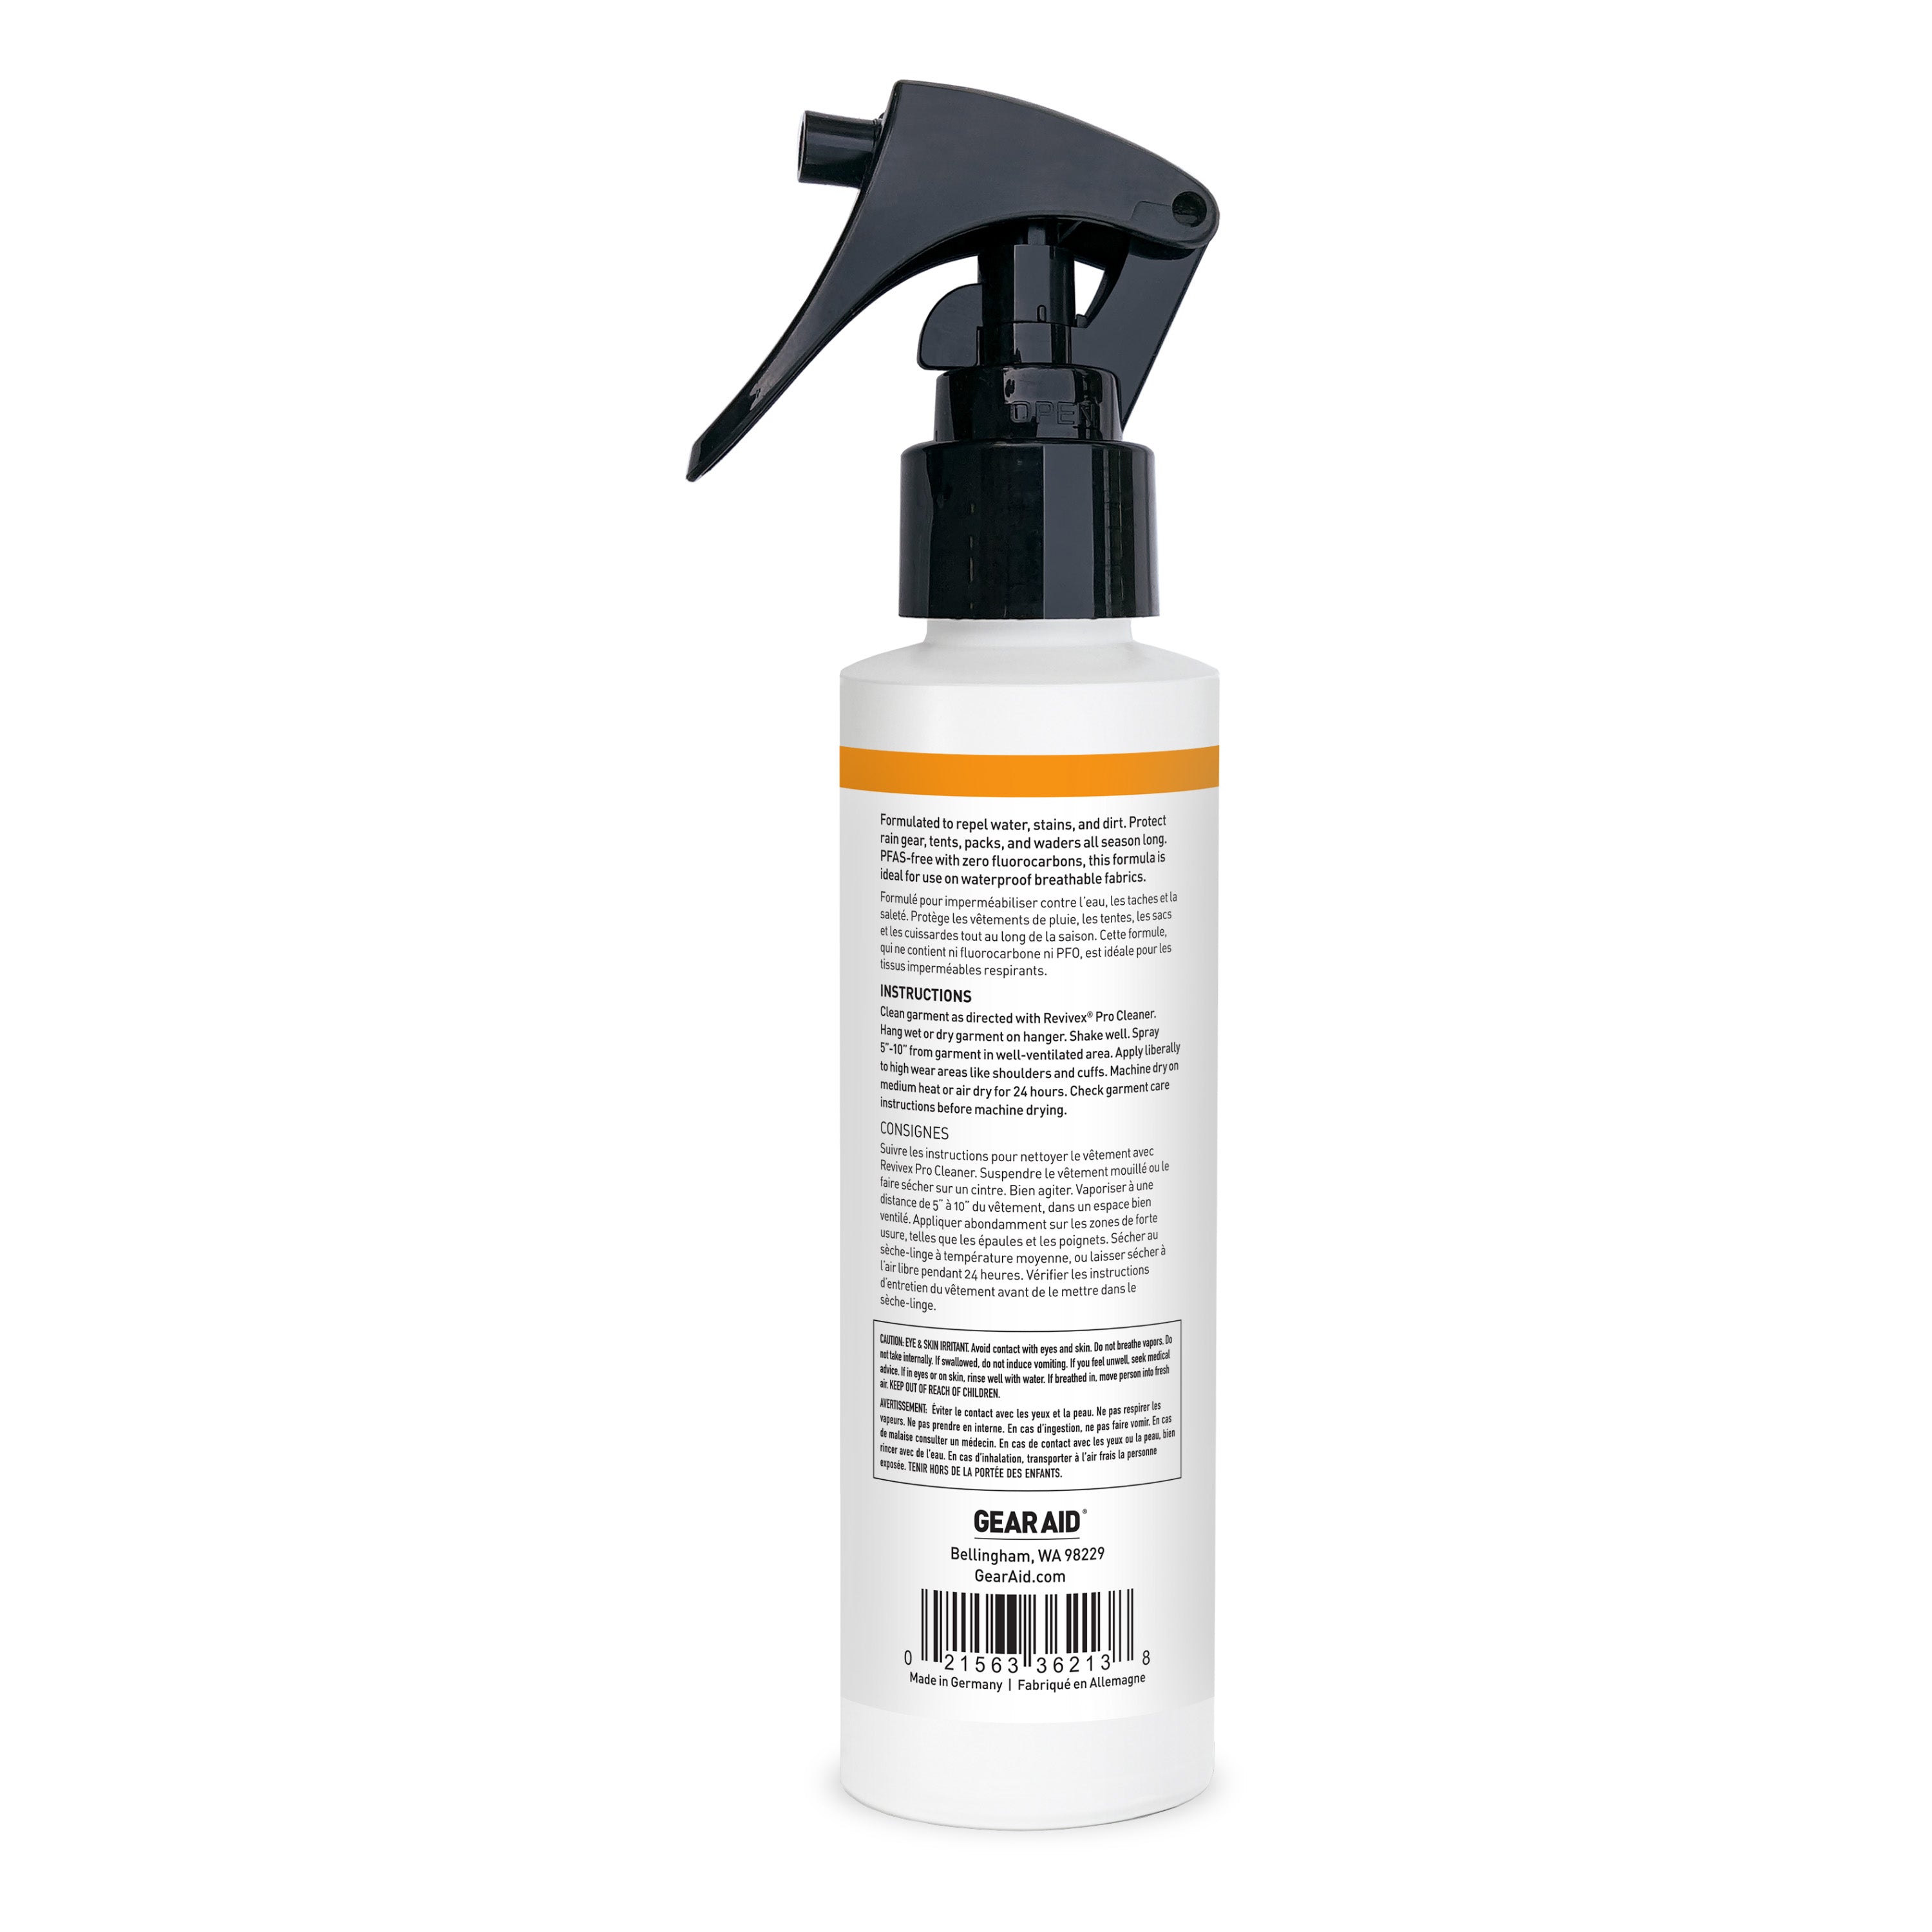 Gear Aid Revivex Spray-On Water Repellent, Renew the water resistance of  your GORE-TEX outerwear with Gear Aid's Revivex Spray-On Water Repellent.  This is a wash/spray/dry application that renews